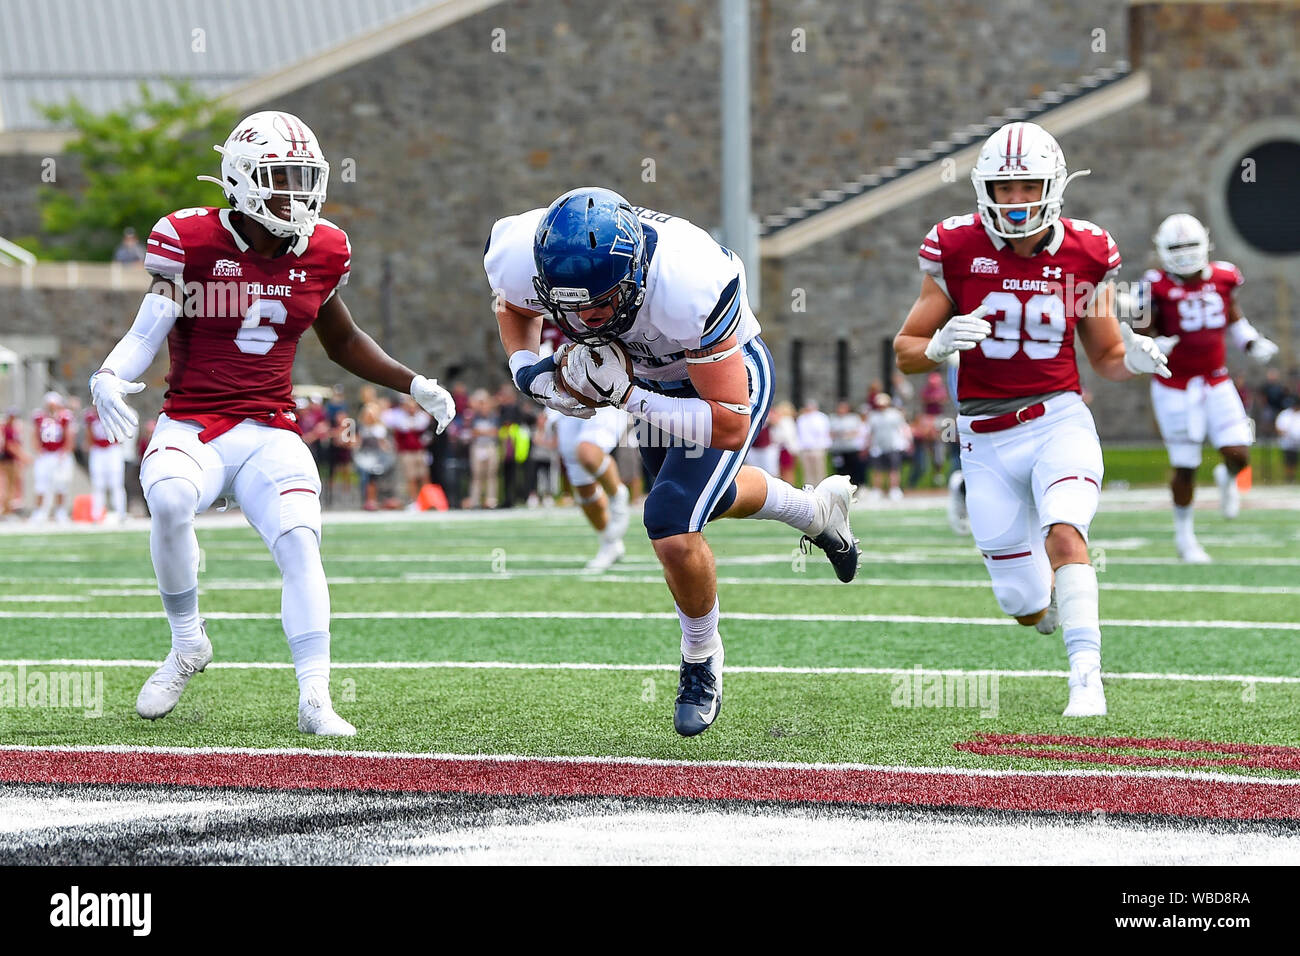 August 24, 2019: Villanova Wildcats wide receiver Andrew Perez (80) leaps into the end zone for a touchdown between Colgate Raiders defensive back Marques Bruce (6) and linebacker Hayden Howren (39) during the first half of an NCAA football game on Saturday, Aug., 24, 2019 at Andy Kerr Stadium in Hamilton, New York. Rich Barnes/CSM Stock Photo